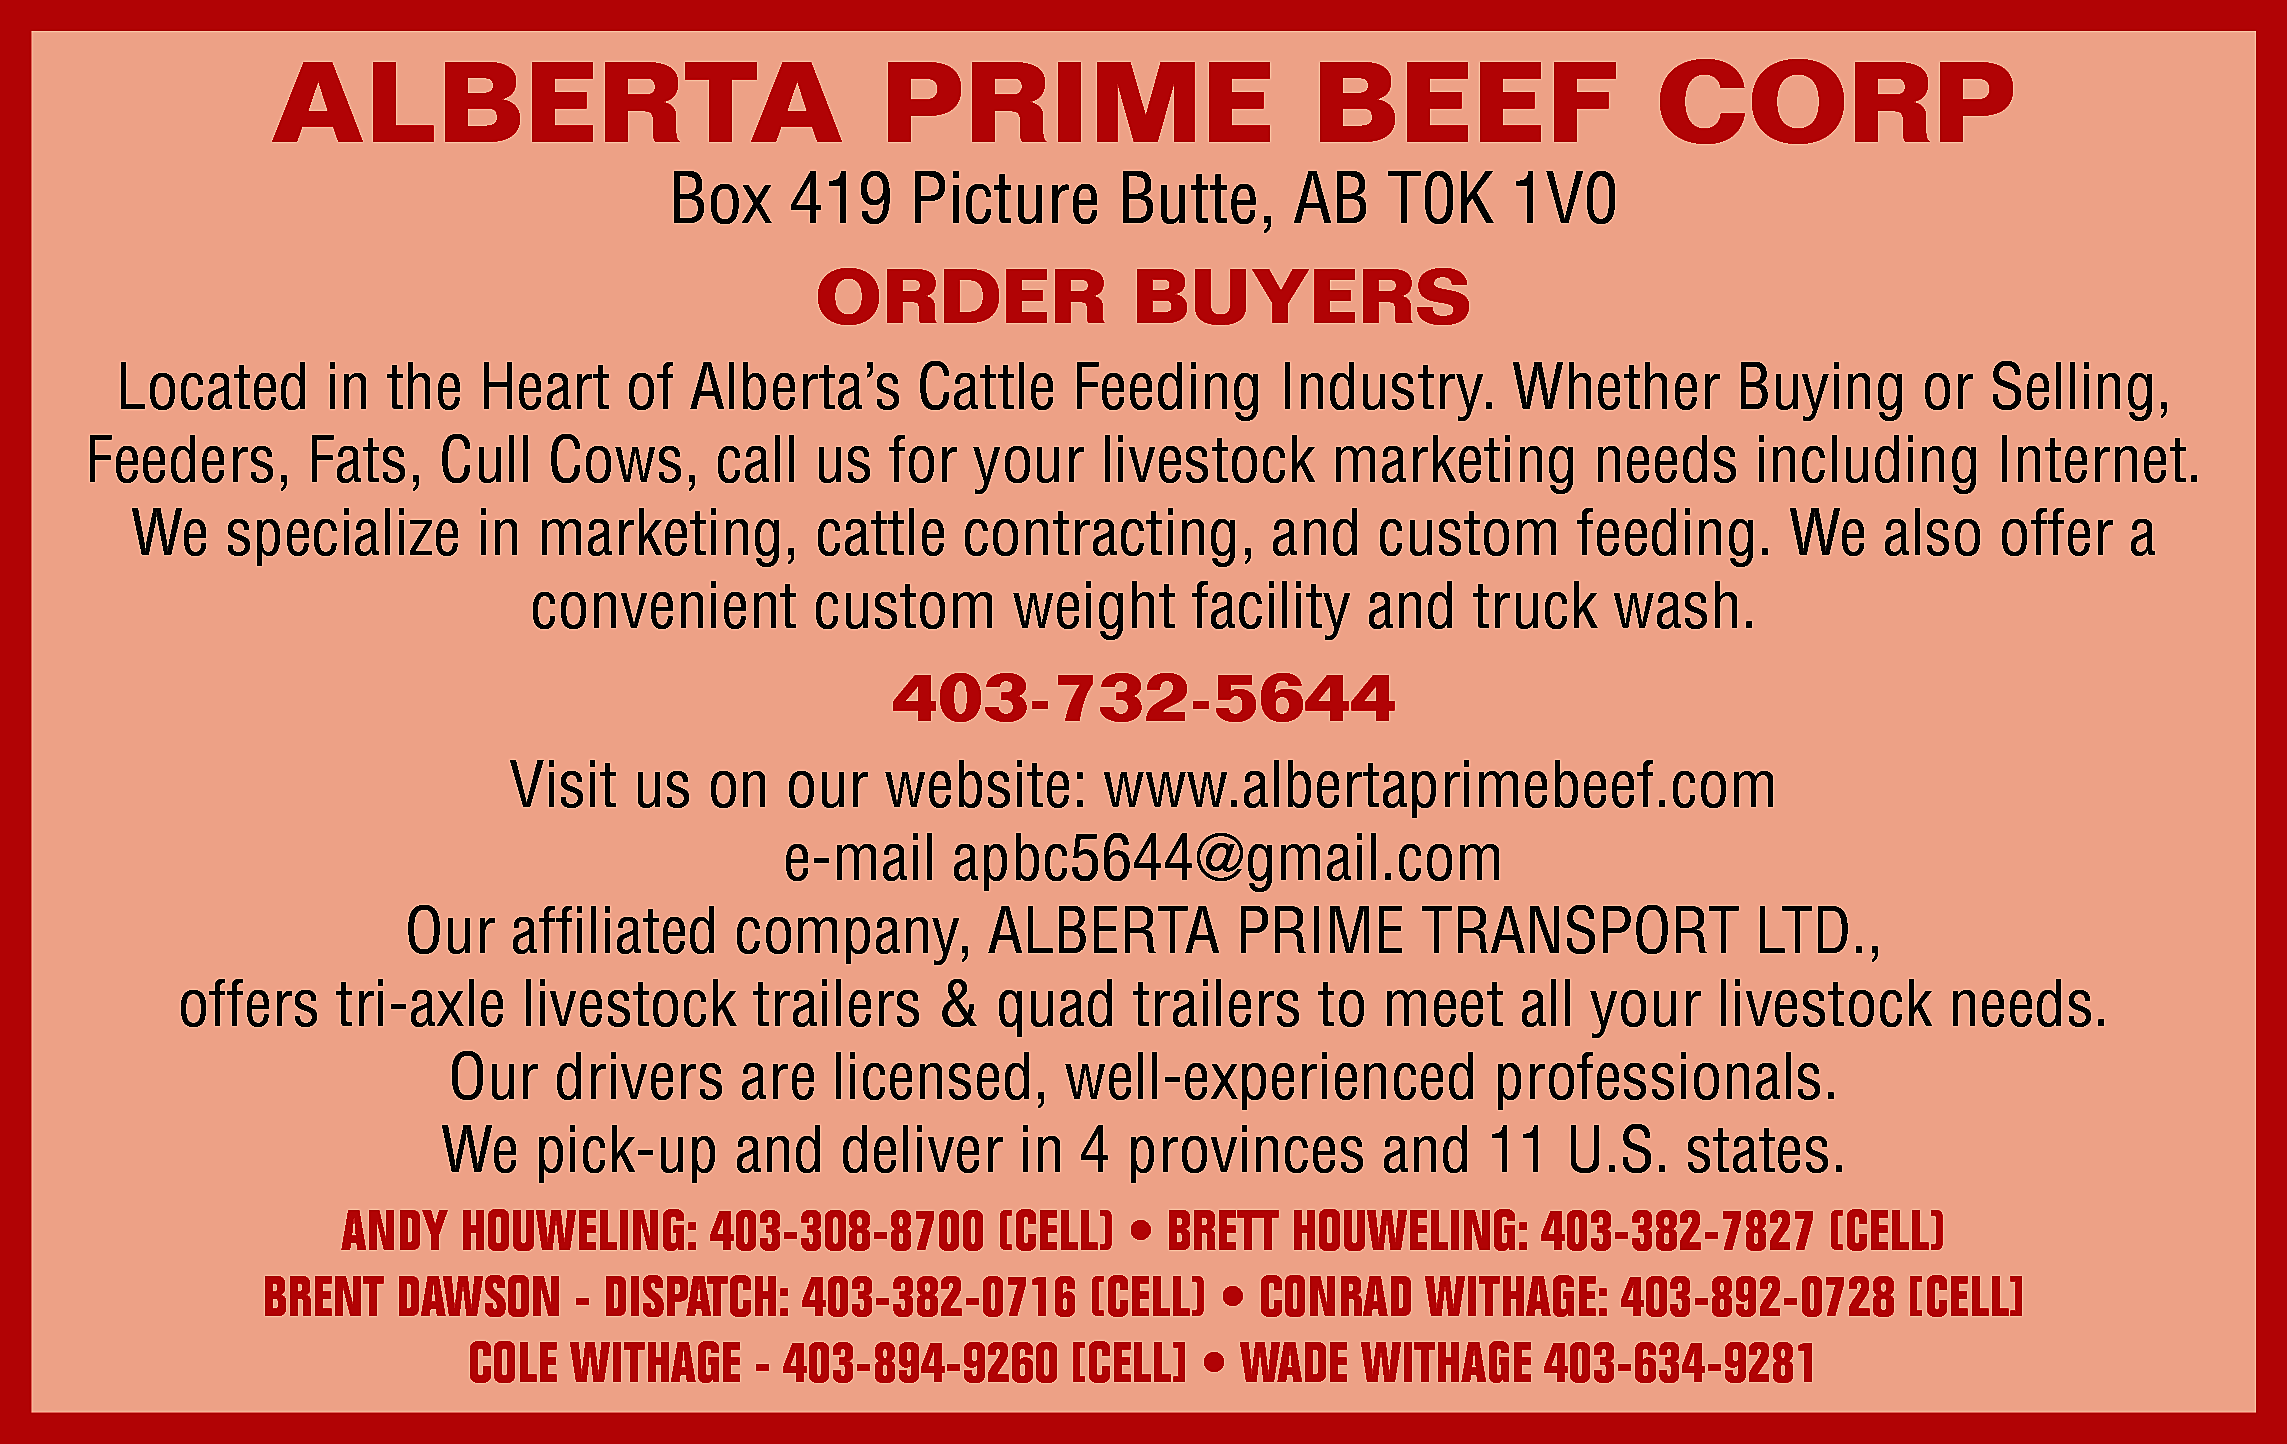 ALBERTA PRIME BEEF CORP <br>Box  ALBERTA PRIME BEEF CORP  Box 419 Picture Butte, AB T0K 1V0    ORDER BUYERS    Located in the Heart of Alberta’s Cattle Feeding Industry. Whether Buying or Selling,  Feeders, Fats, Cull Cows, call us for your livestock marketing needs including Internet.  We specialize in marketing, cattle contracting, and custom feeding. We also offer a  convenient custom weight facility and truck wash.    403-732-5644  Visit us on our website: www.albertaprimebeef.com  e-mail apbc5644@gmail.com  Our affiliated company, ALBERTA PRIME TRANSPORT LTD.,  offers tri-axle livestock trailers & quad trailers to meet all your livestock needs.  Our drivers are licensed, well-experienced professionals.  We pick-up and deliver in 4 provinces and 11 U.S. states.  ANDY HOUWELING: 403-308-8700 (CELL) • BRETT HOUWELING: 403-382-7827 (CELL)  BRENT DAWSON - DISPATCH: 403-382-0716 (CELL) • CONRAD WITHAGE: 403-892-0728 [CELL]  COLE WITHAGE - 403-894-9260 [CELL] • WADE WITHAGE 403-634-9281    